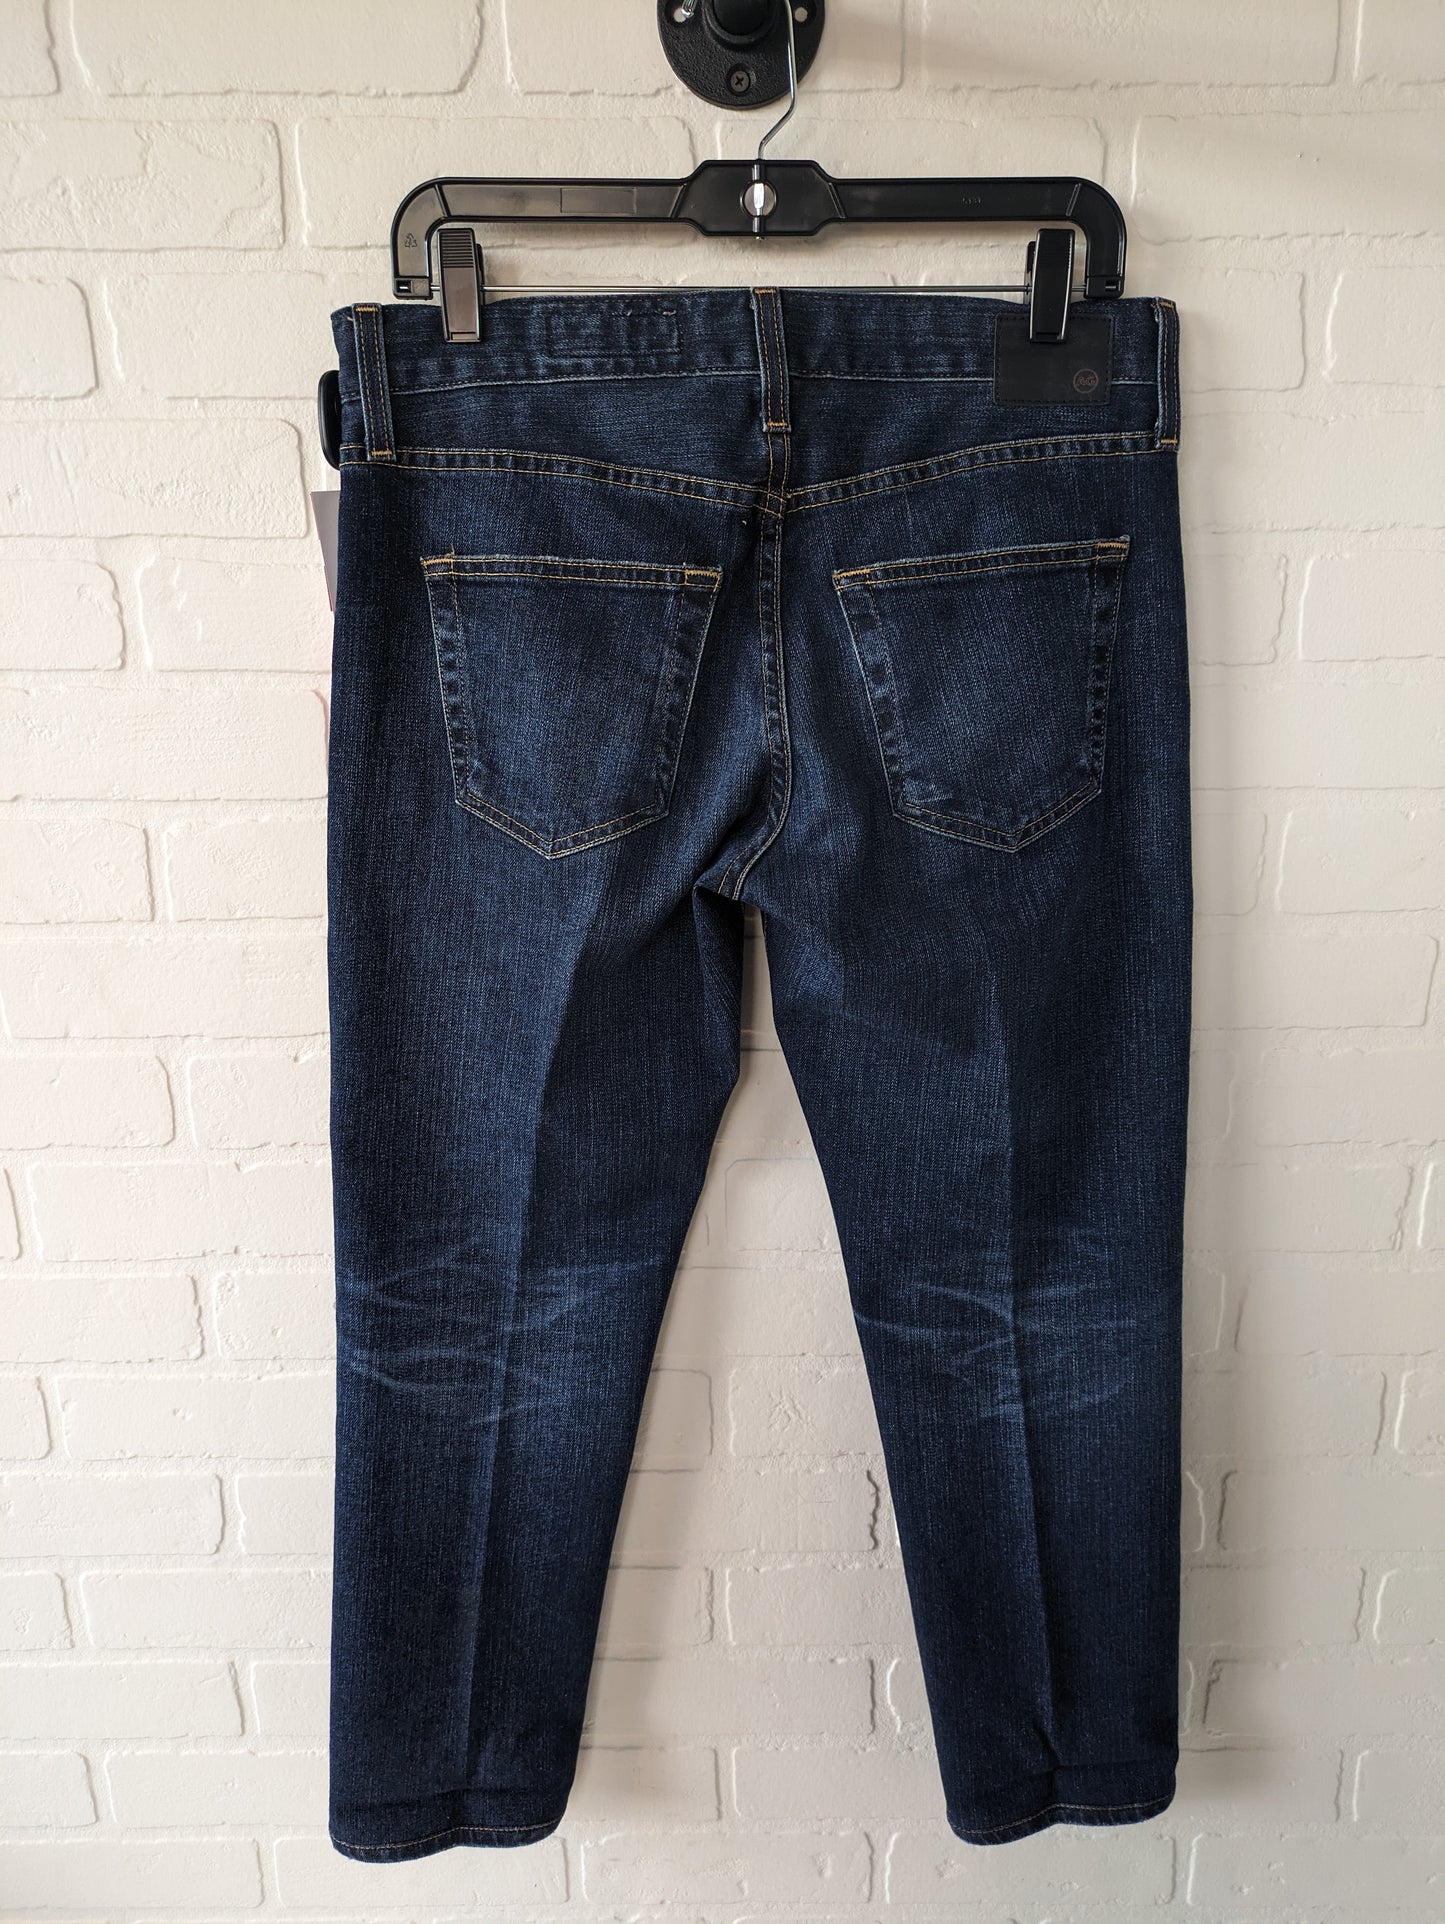 Jeans Designer By Adriano Goldschmied  Size: 4